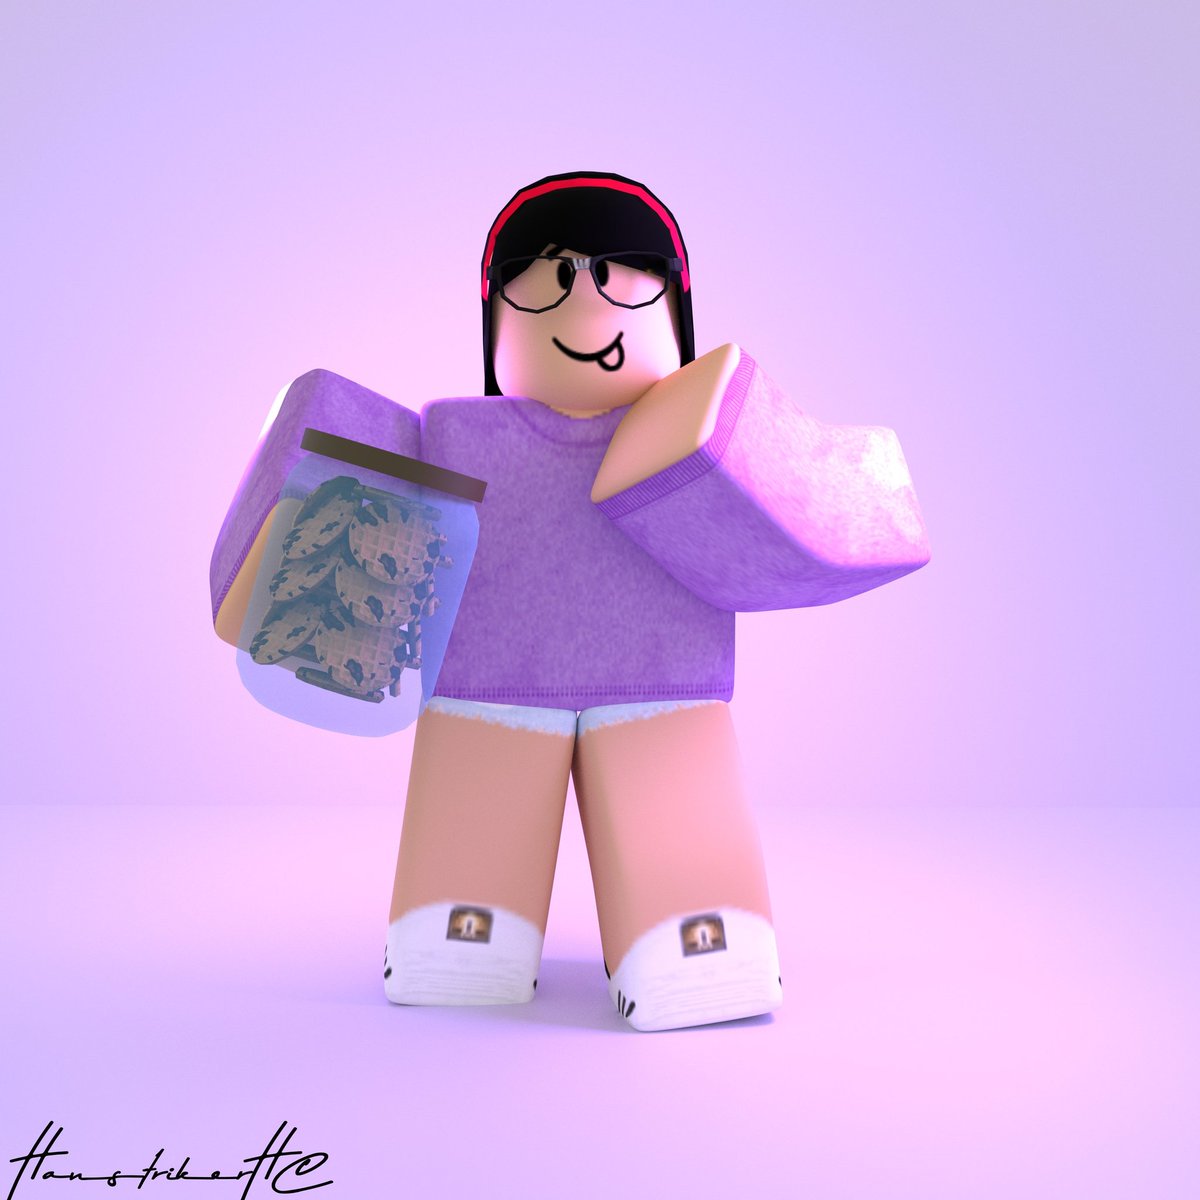 Hans On Twitter Doing Some More Free Renders Link Your Roblox